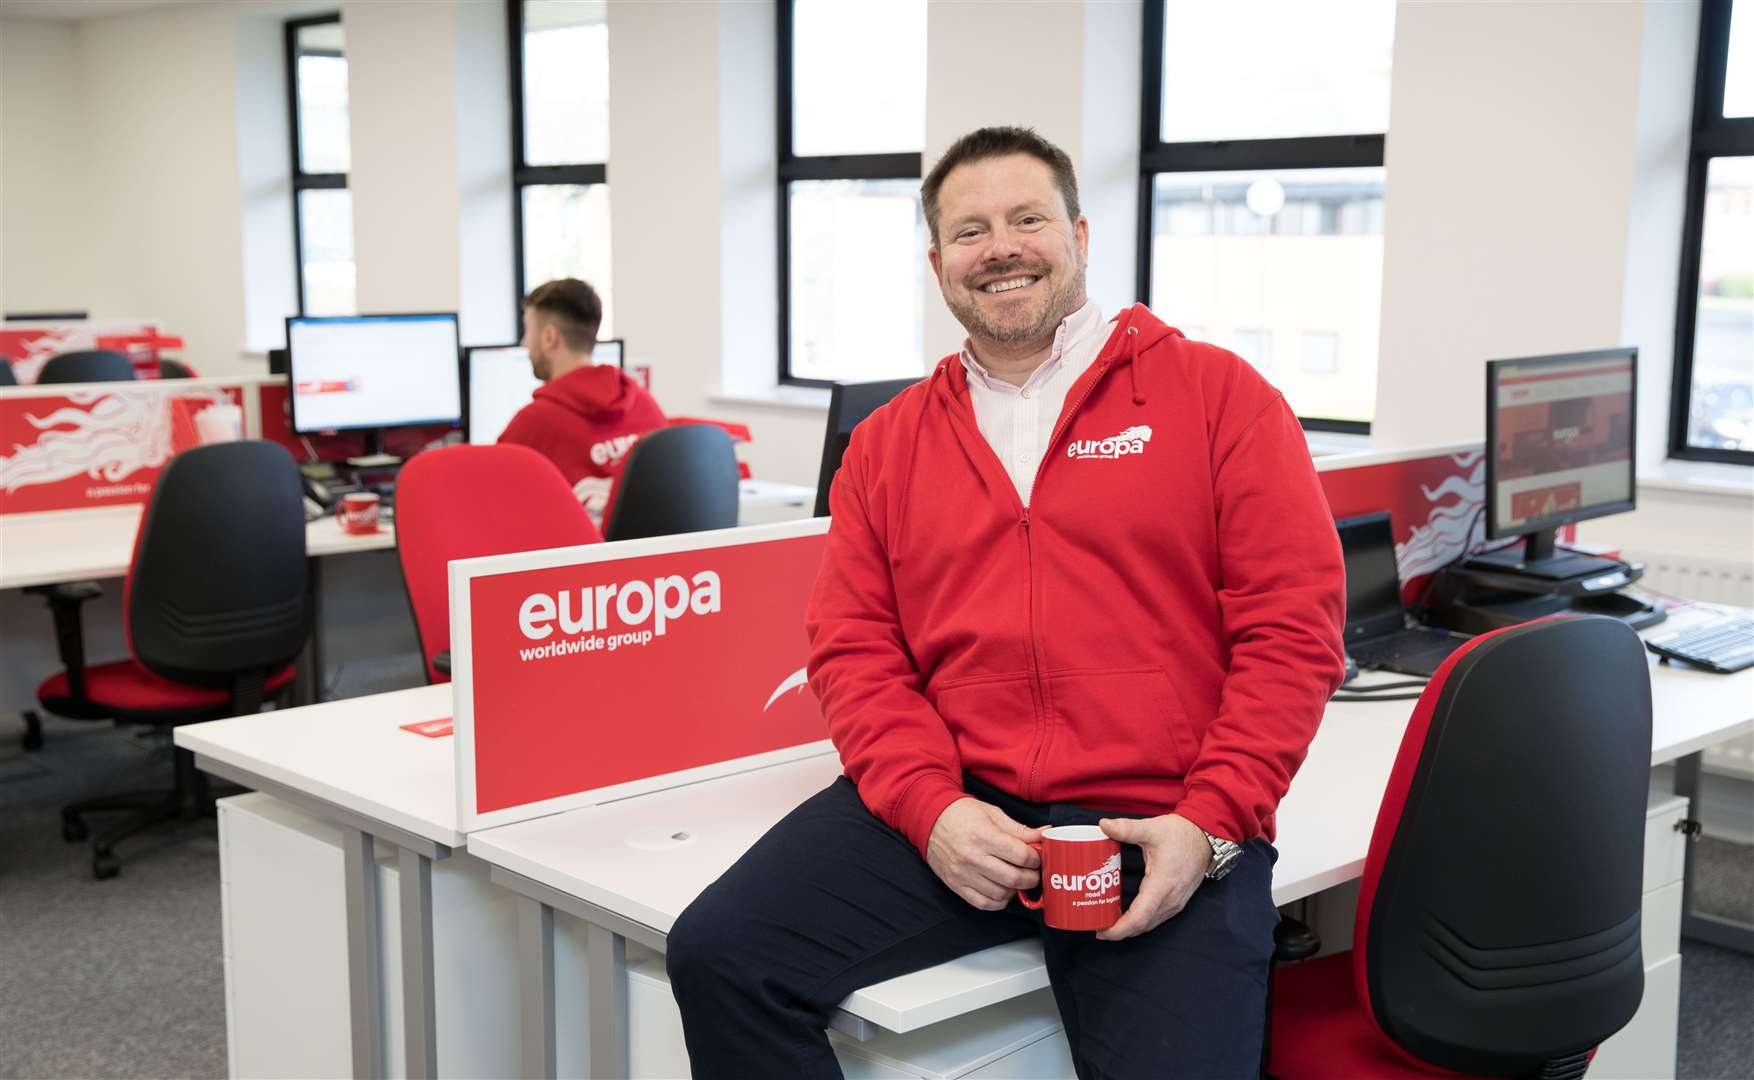 Mat Jobson, the new general manager at the Europa Contact Centre in Ashford